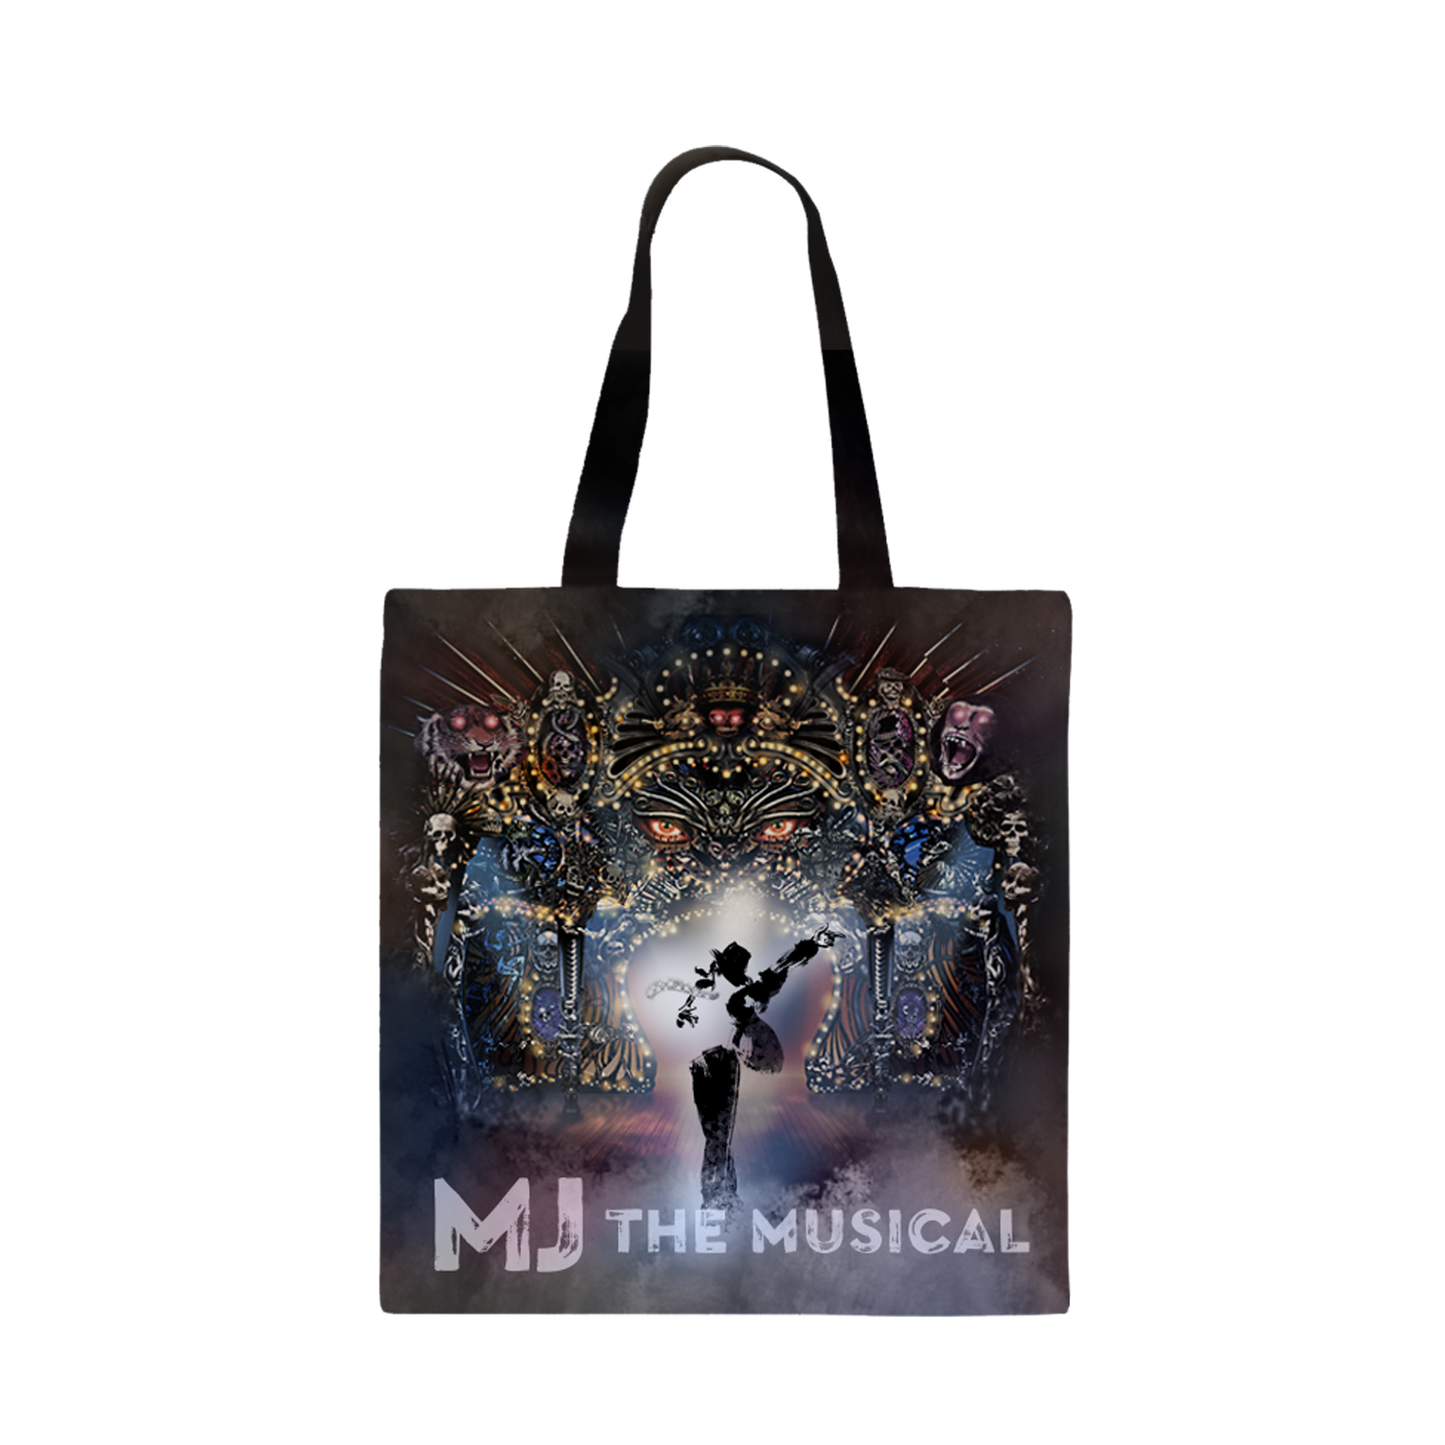 MJ THE MUSICAL Thriller Tote